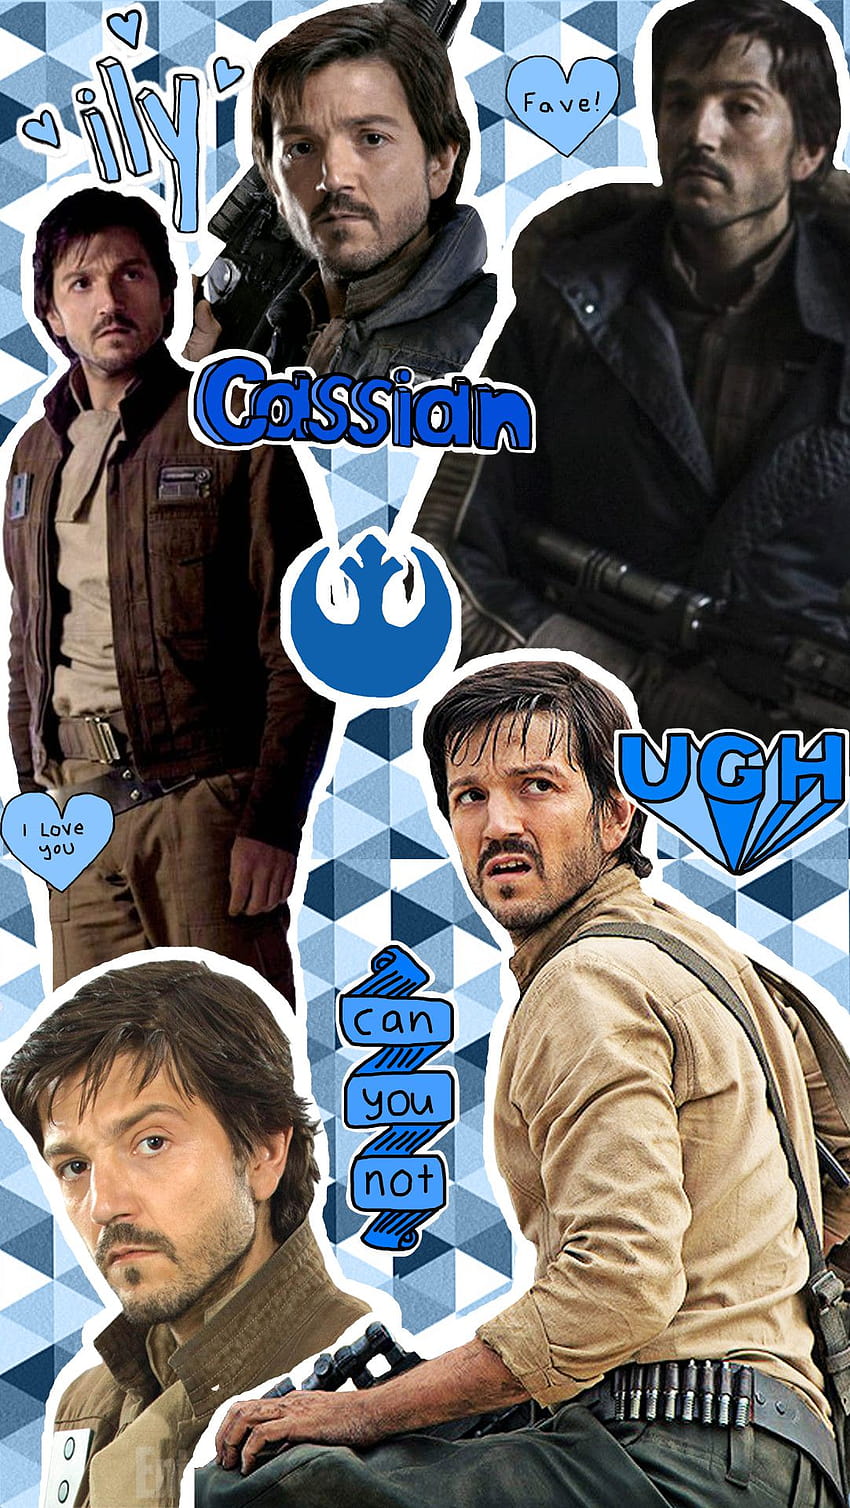 Download Captain Cassian Andor wallpapers for mobile phone free Captain  Cassian Andor HD pictures